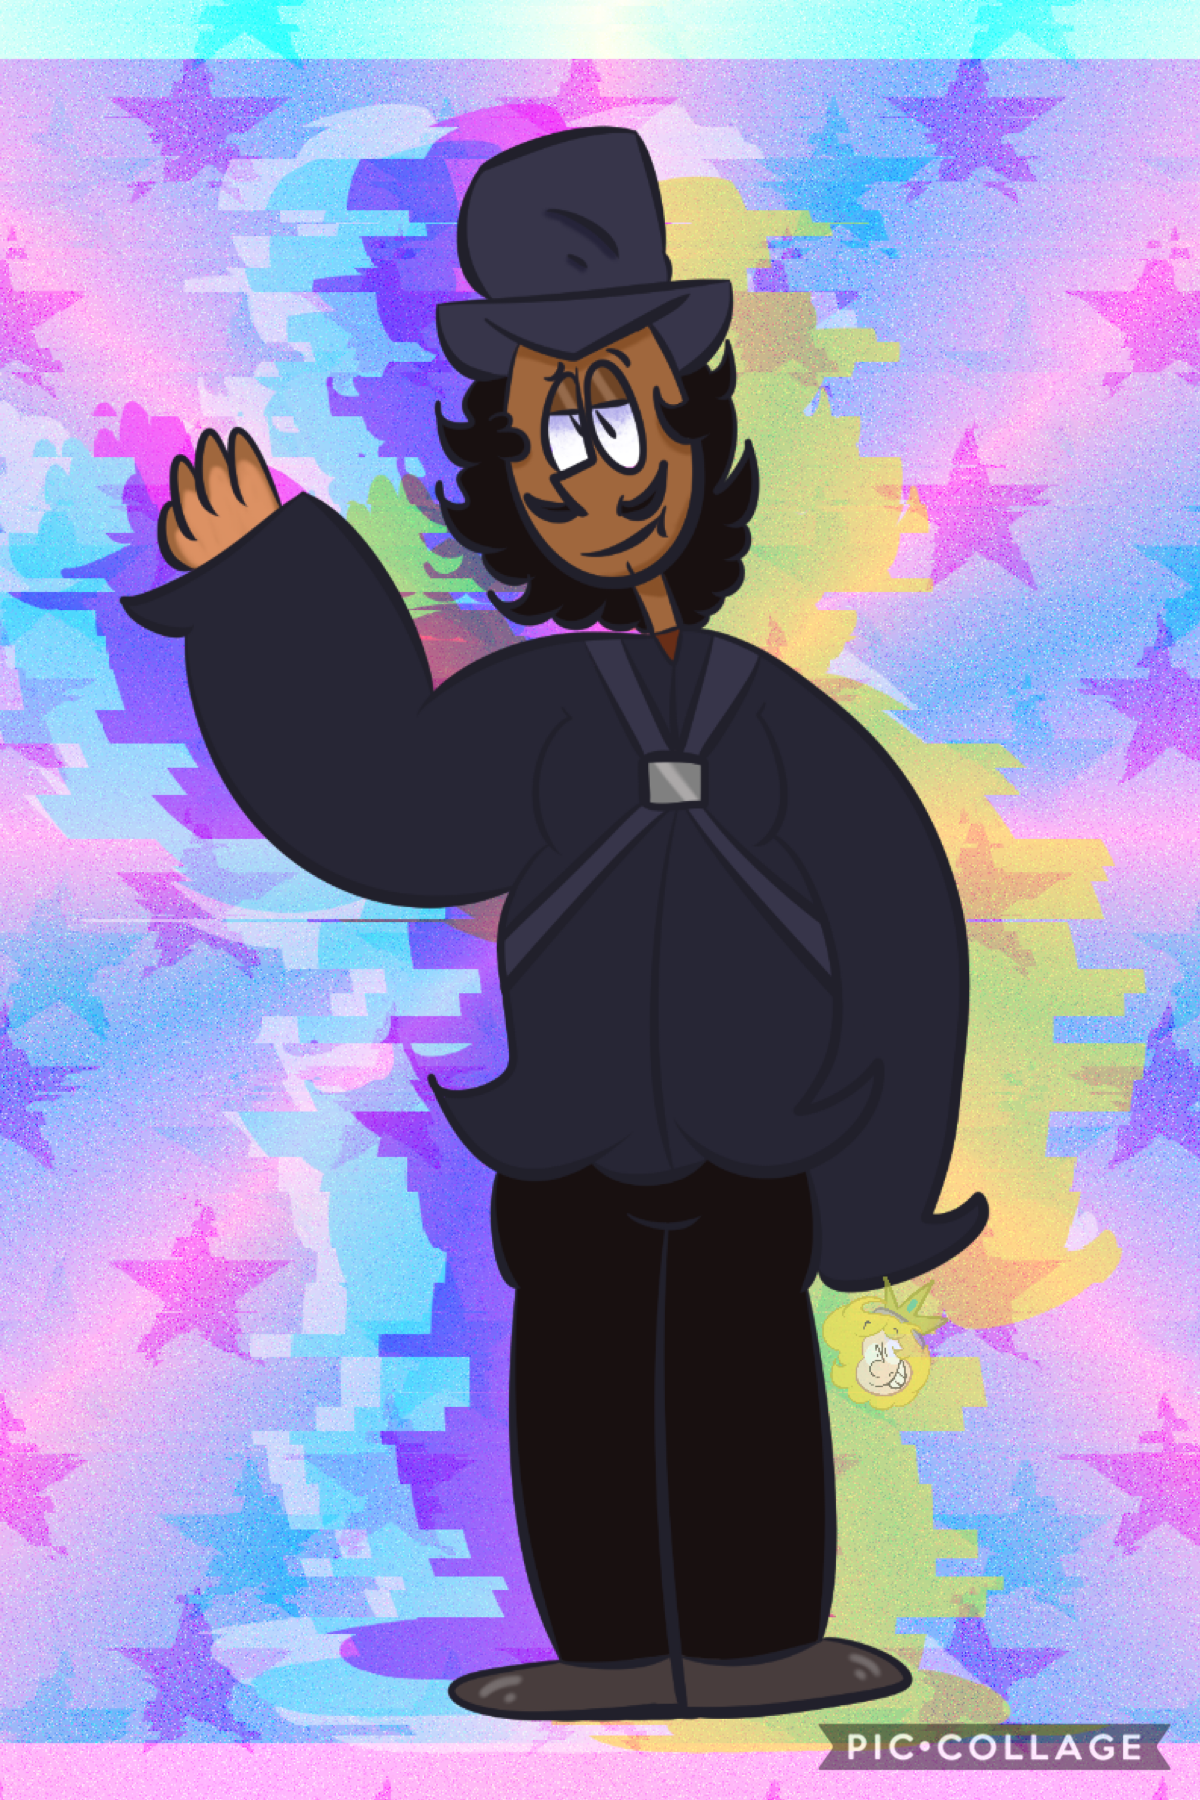 lole heres some art of joel from lisa the pointless 